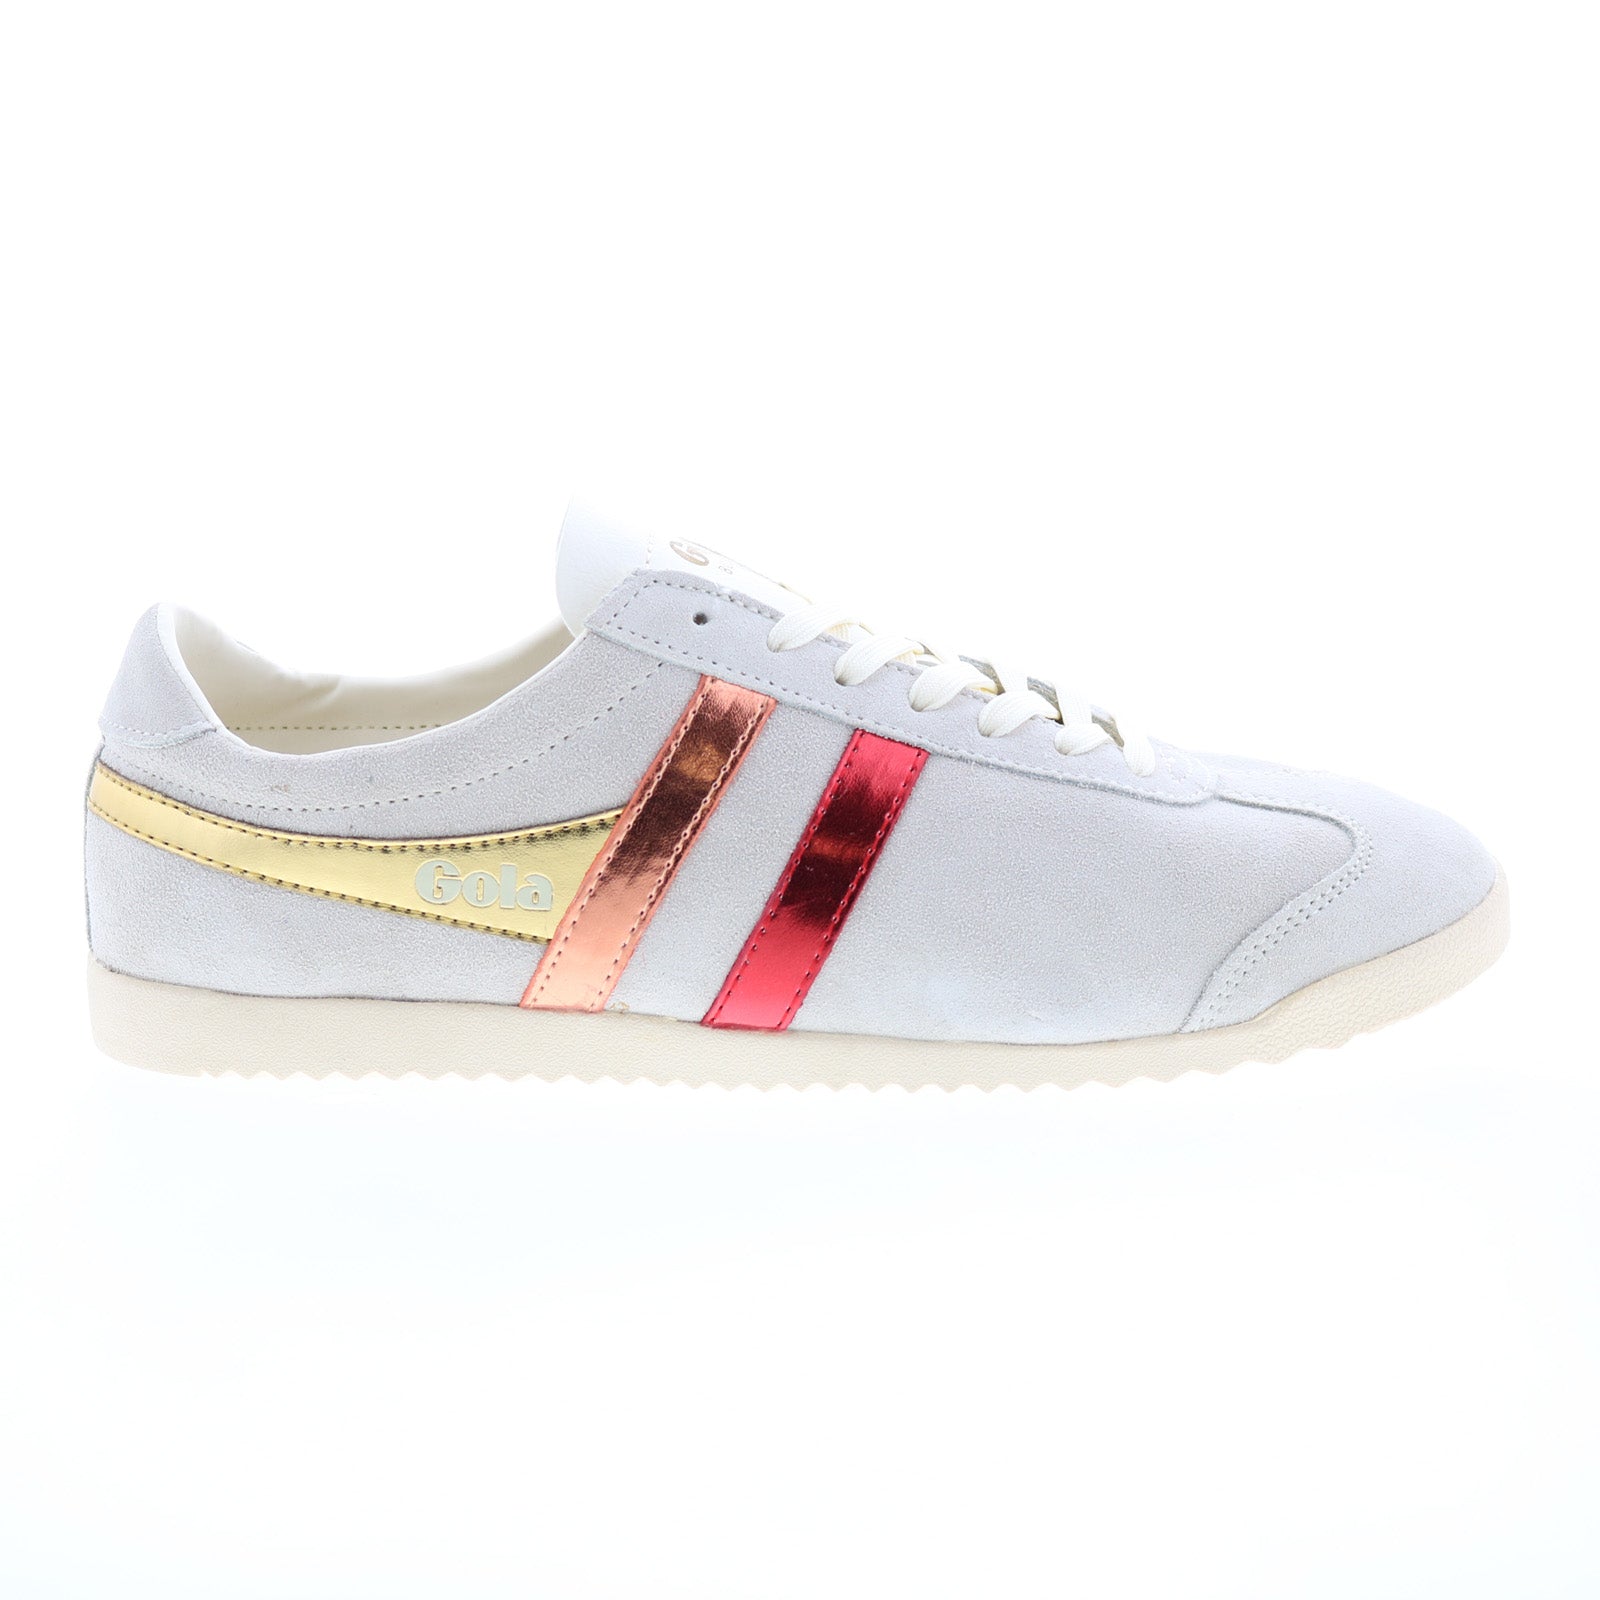 Gola Bullet Flare CLA322 Womens Gray Suede Lace Up Lifestyle Sneakers Shoes